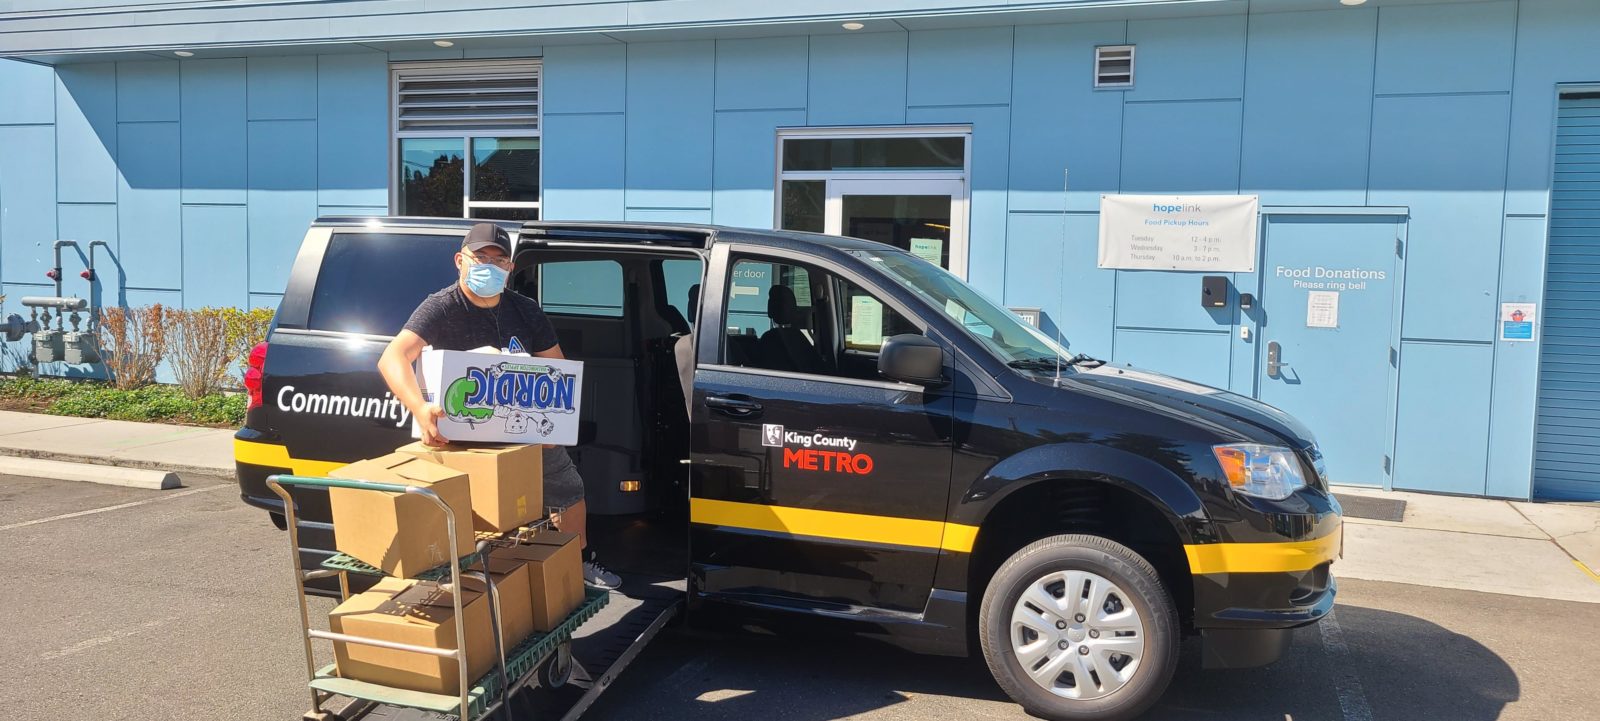 Paulo Medina, a Community Van volunteer drivers, lends a helping hand to deliver food boxes from the Shoreline Hopelink food bank.